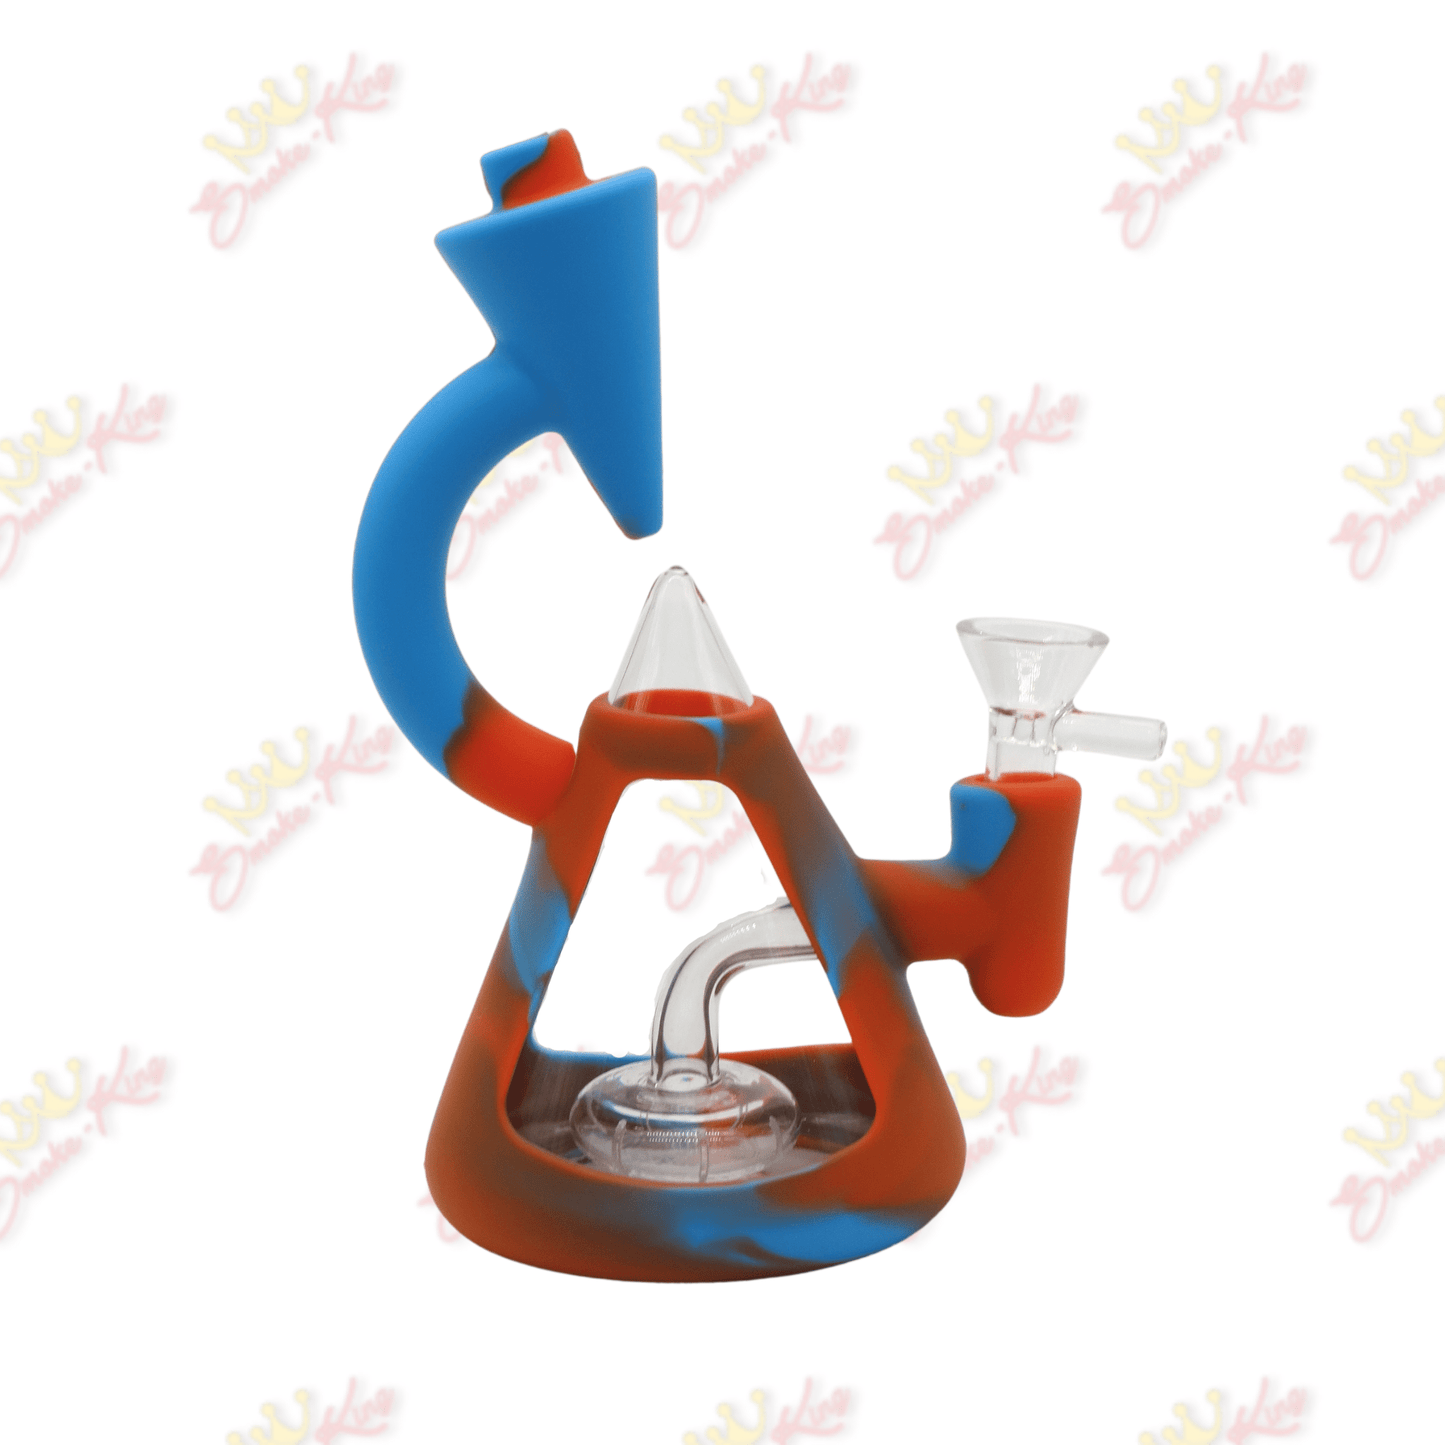 Smoke King Blue & Red 7 Inch Silicone Frame Perc Bong 7 Inch Silicone Frame Perc Bong | Smoke King